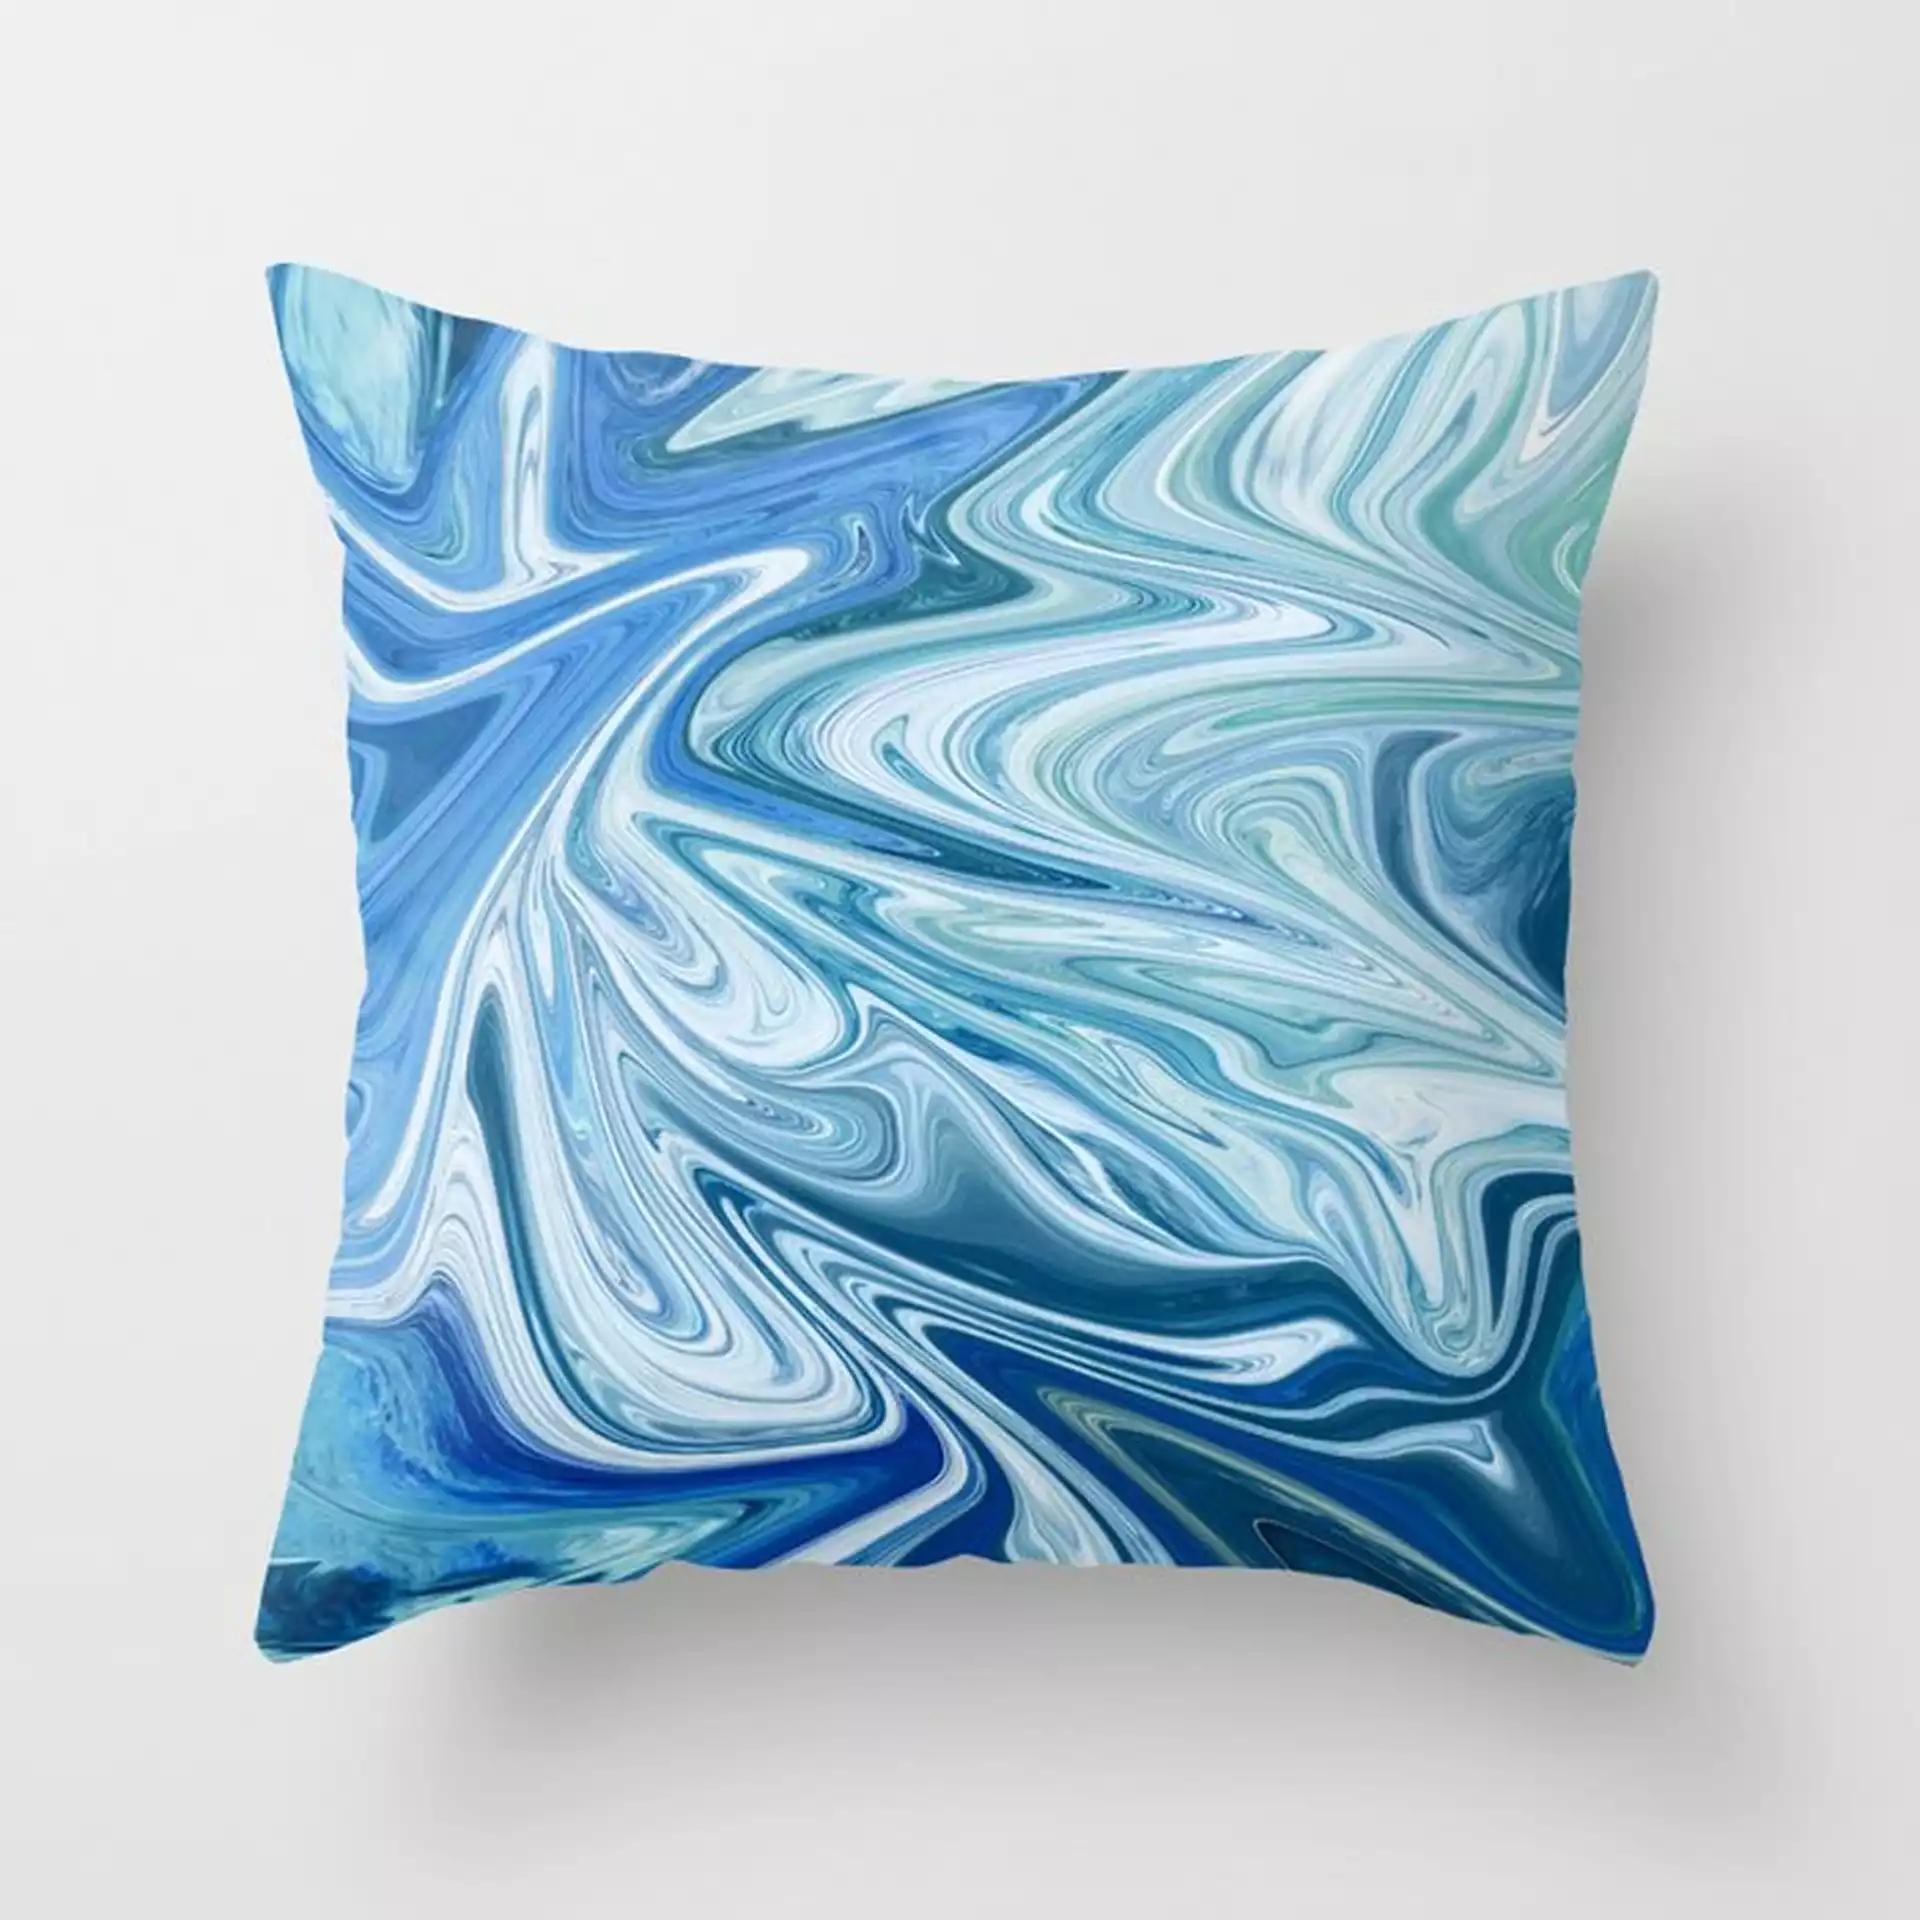 Gemstone [4]: A Vibrant Abstract Melted Design In Blues And White By Alyssa Hamilton Art Couch Throw Pillow by Alyssa Hamilton Art - Cover (16" x 16") with pillow insert - Outdoor Pillow